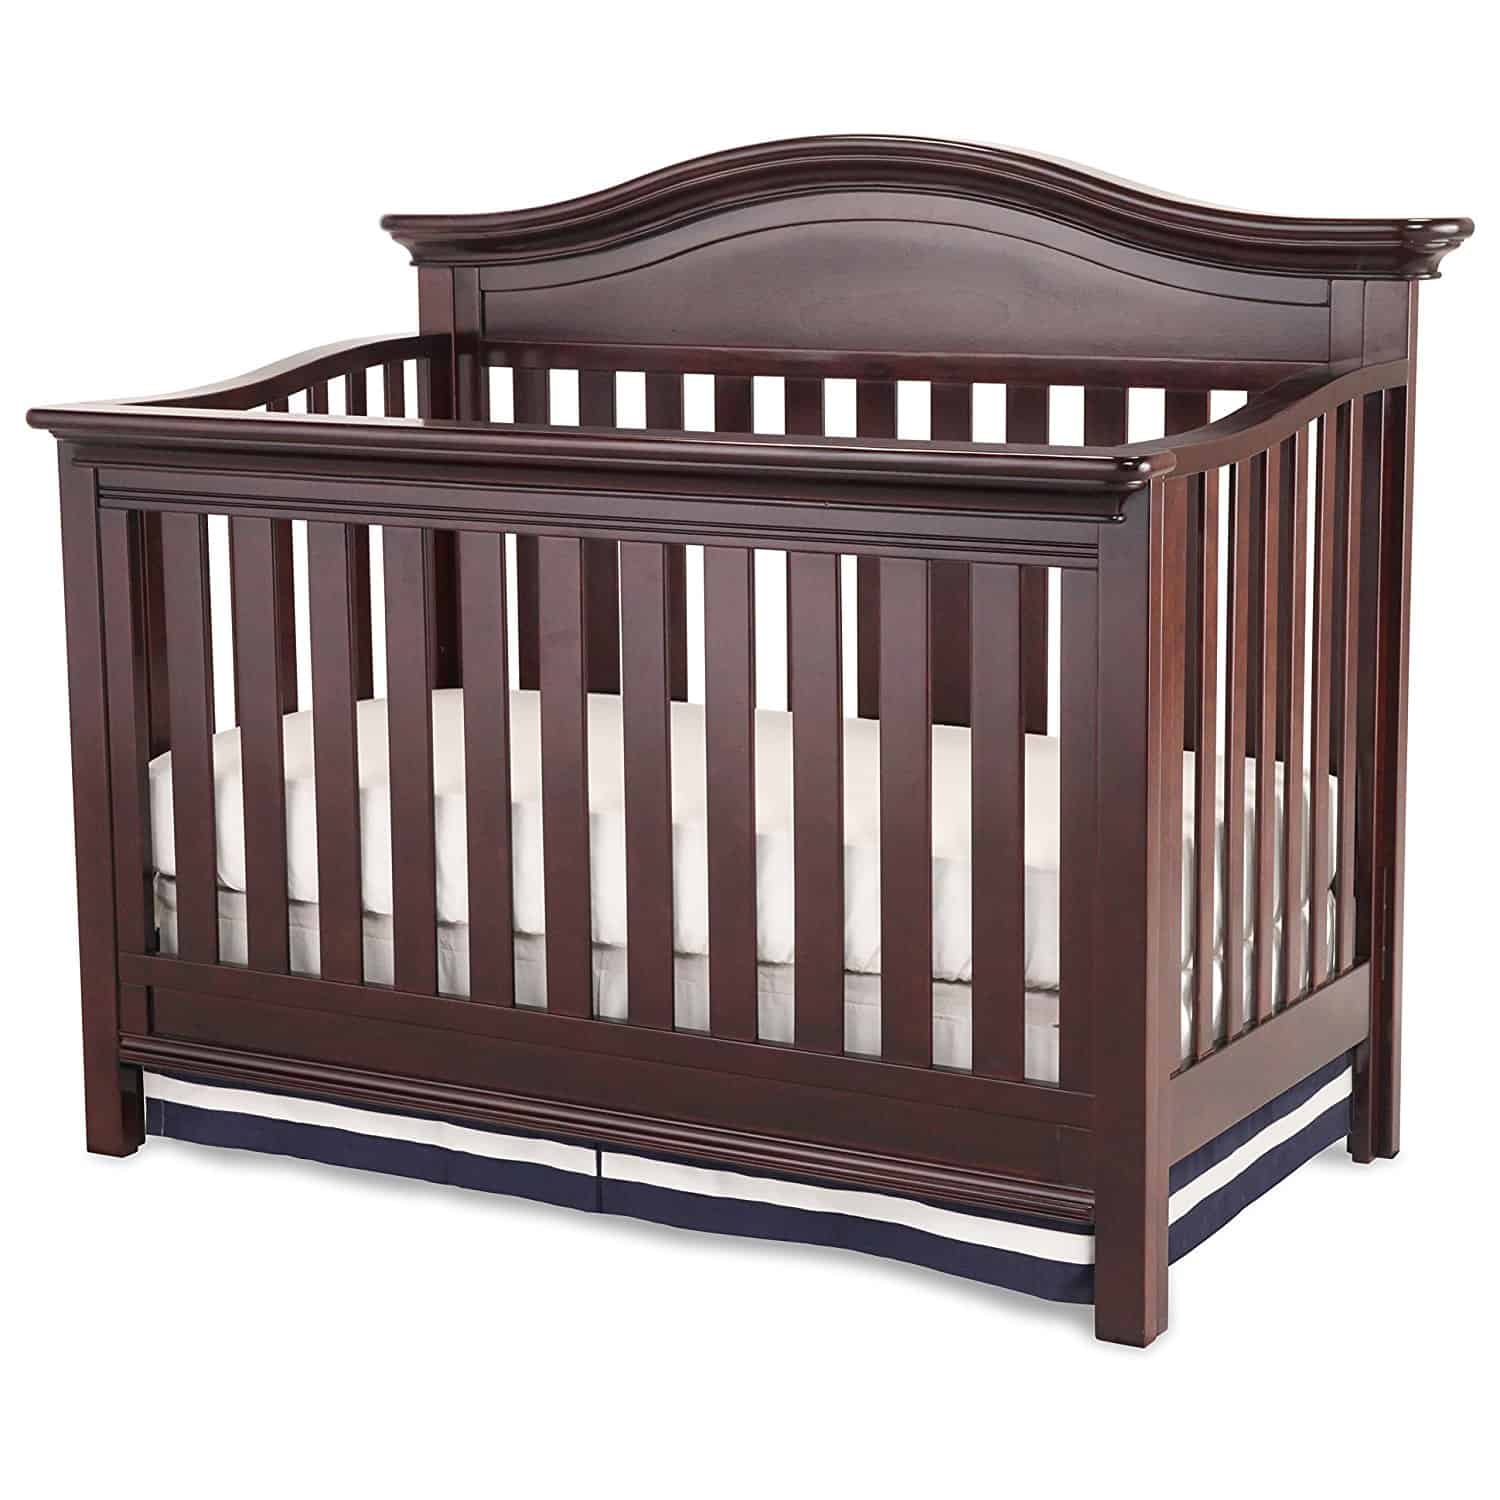 Crib Brand Review Simmons Baby Bargains